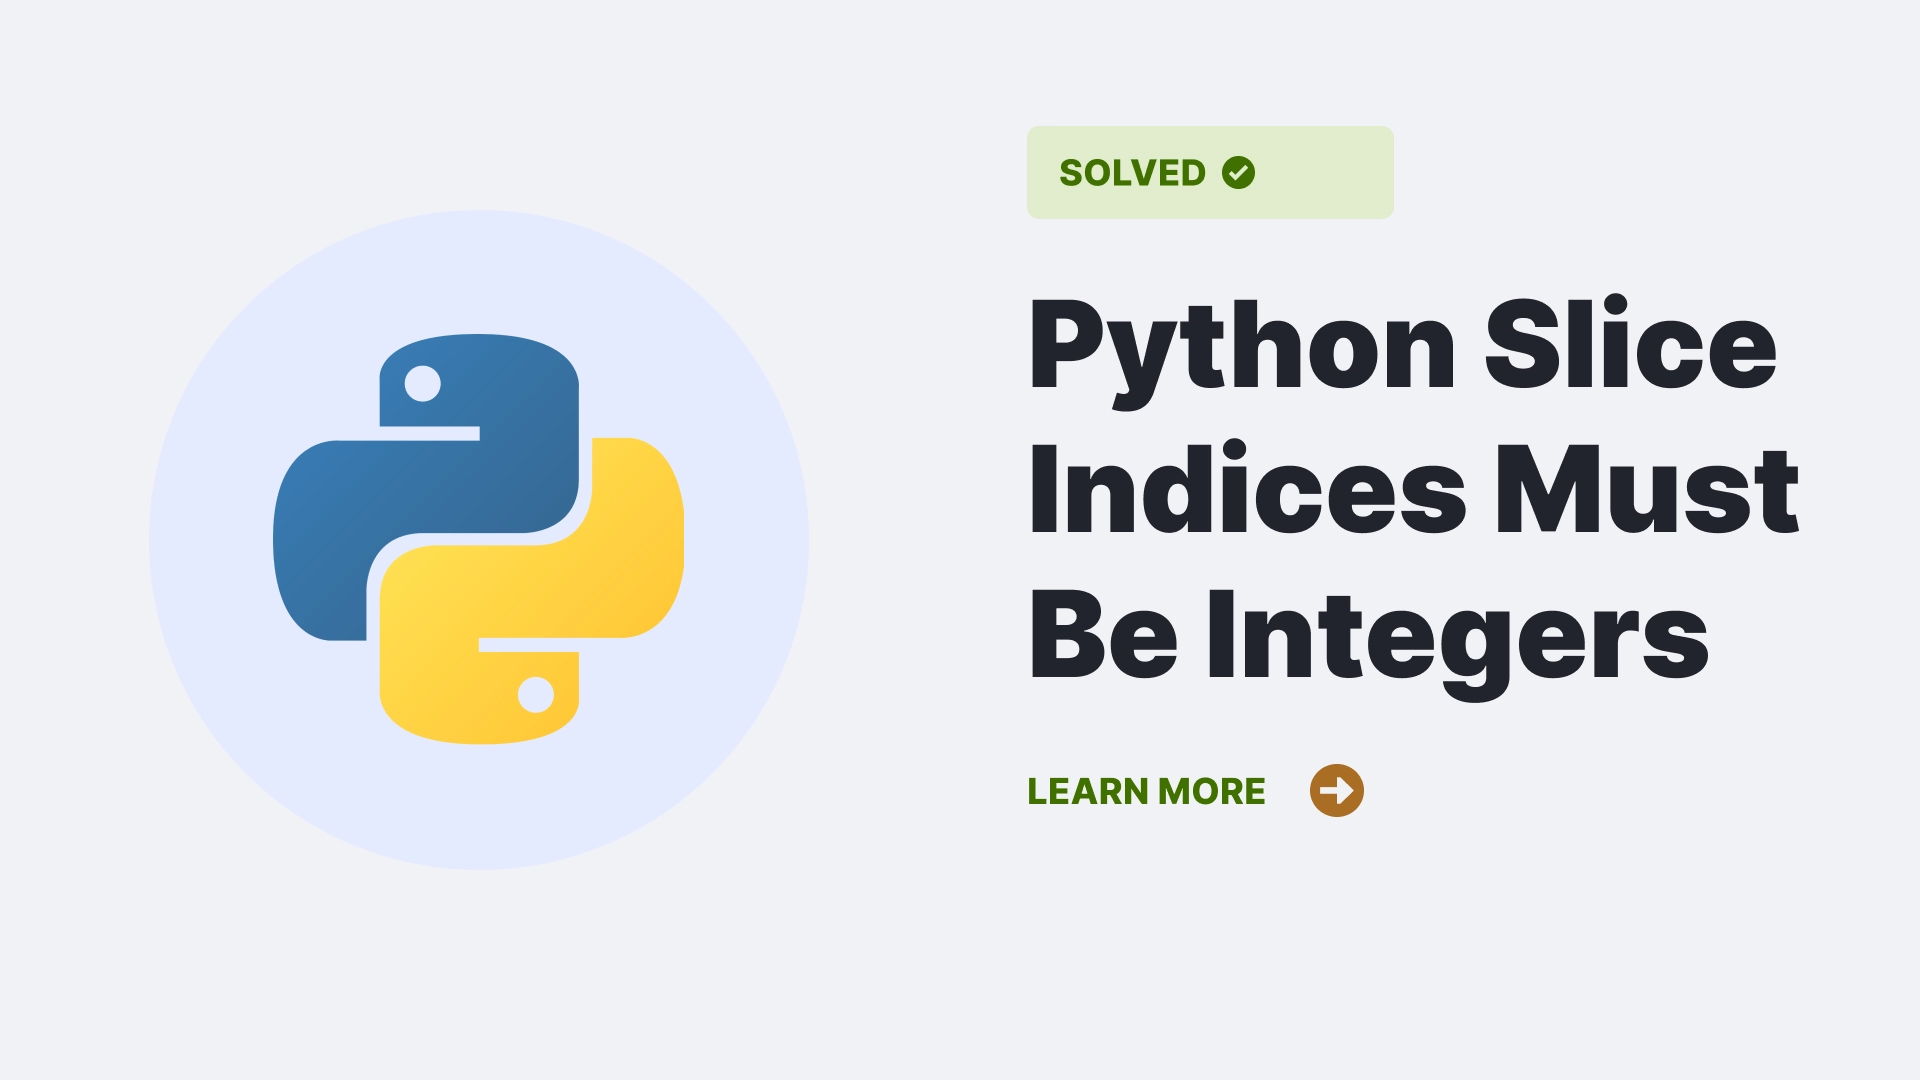 Python Slice Indices Must Be Integers